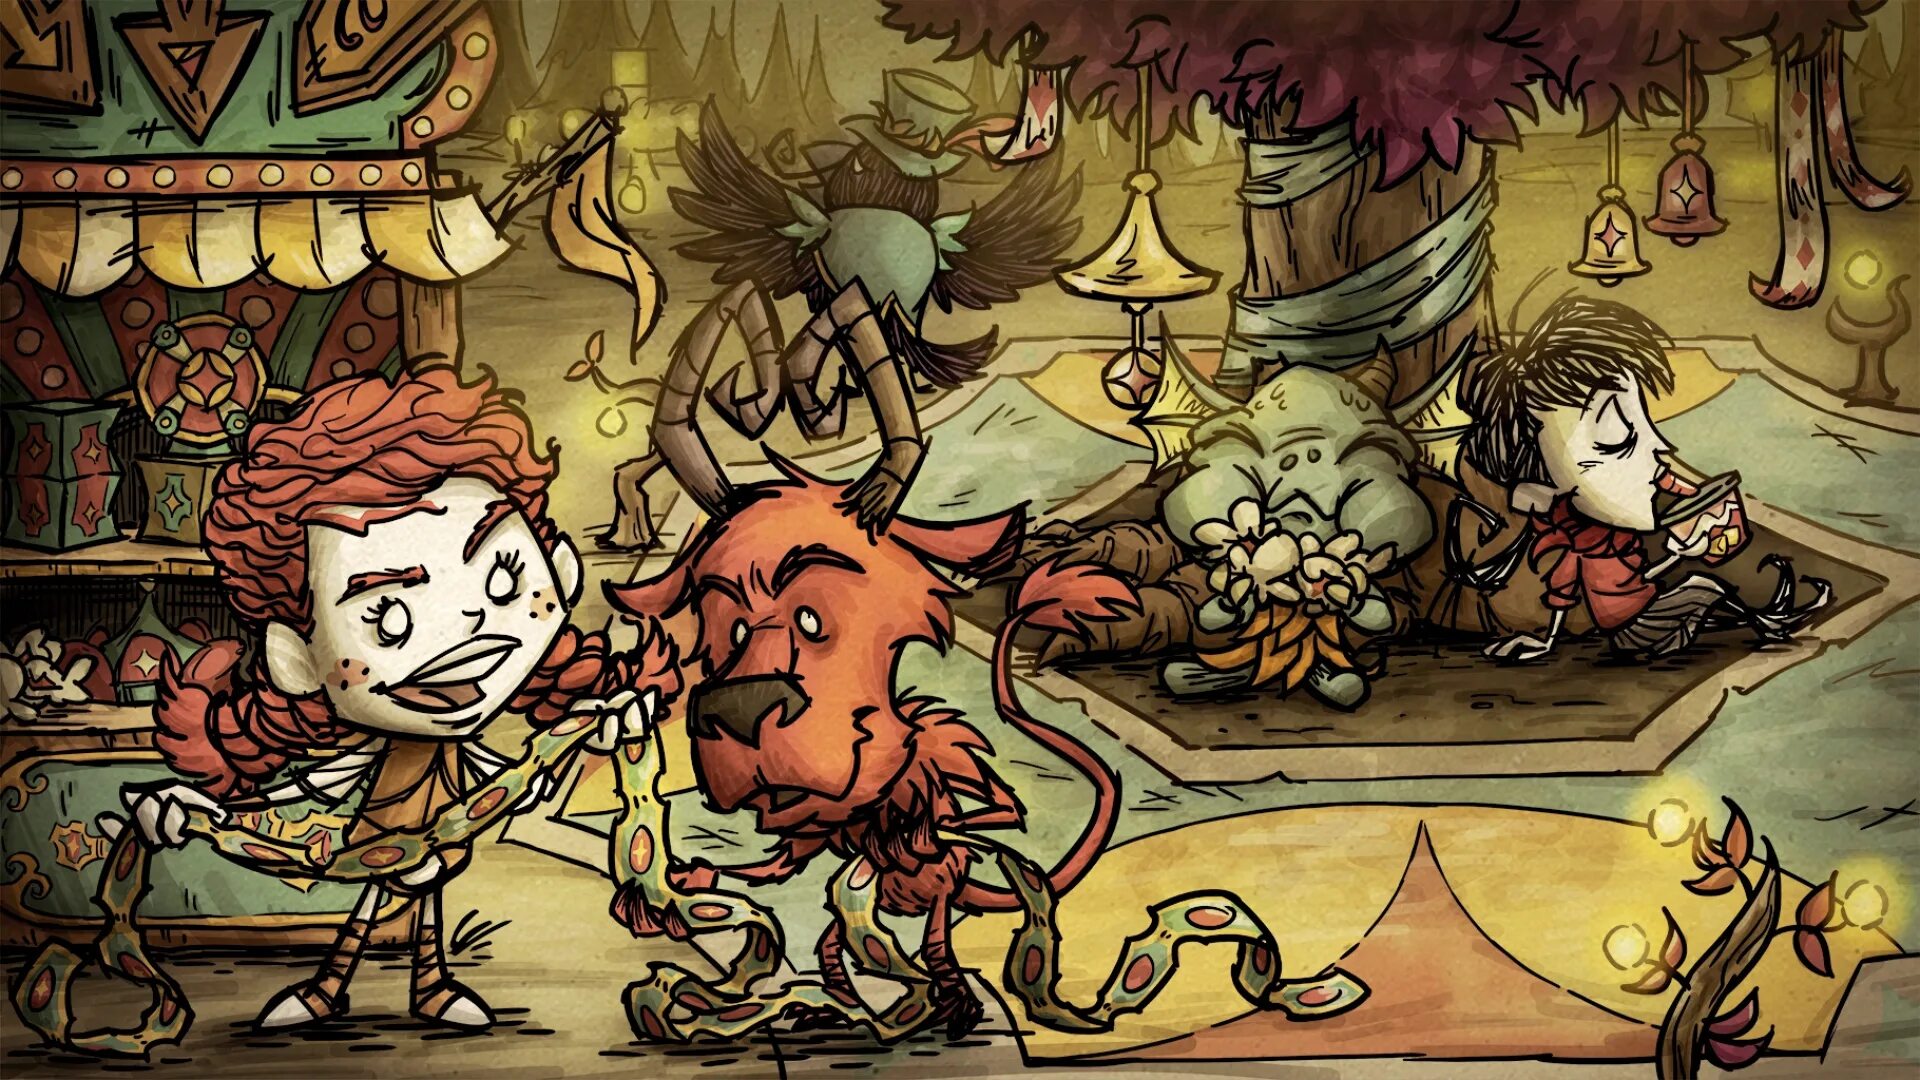 Don't Starve игра. Don't Starve together карнавал. Донт старв 3. Don't Starve together игрушки. Донт старв длс